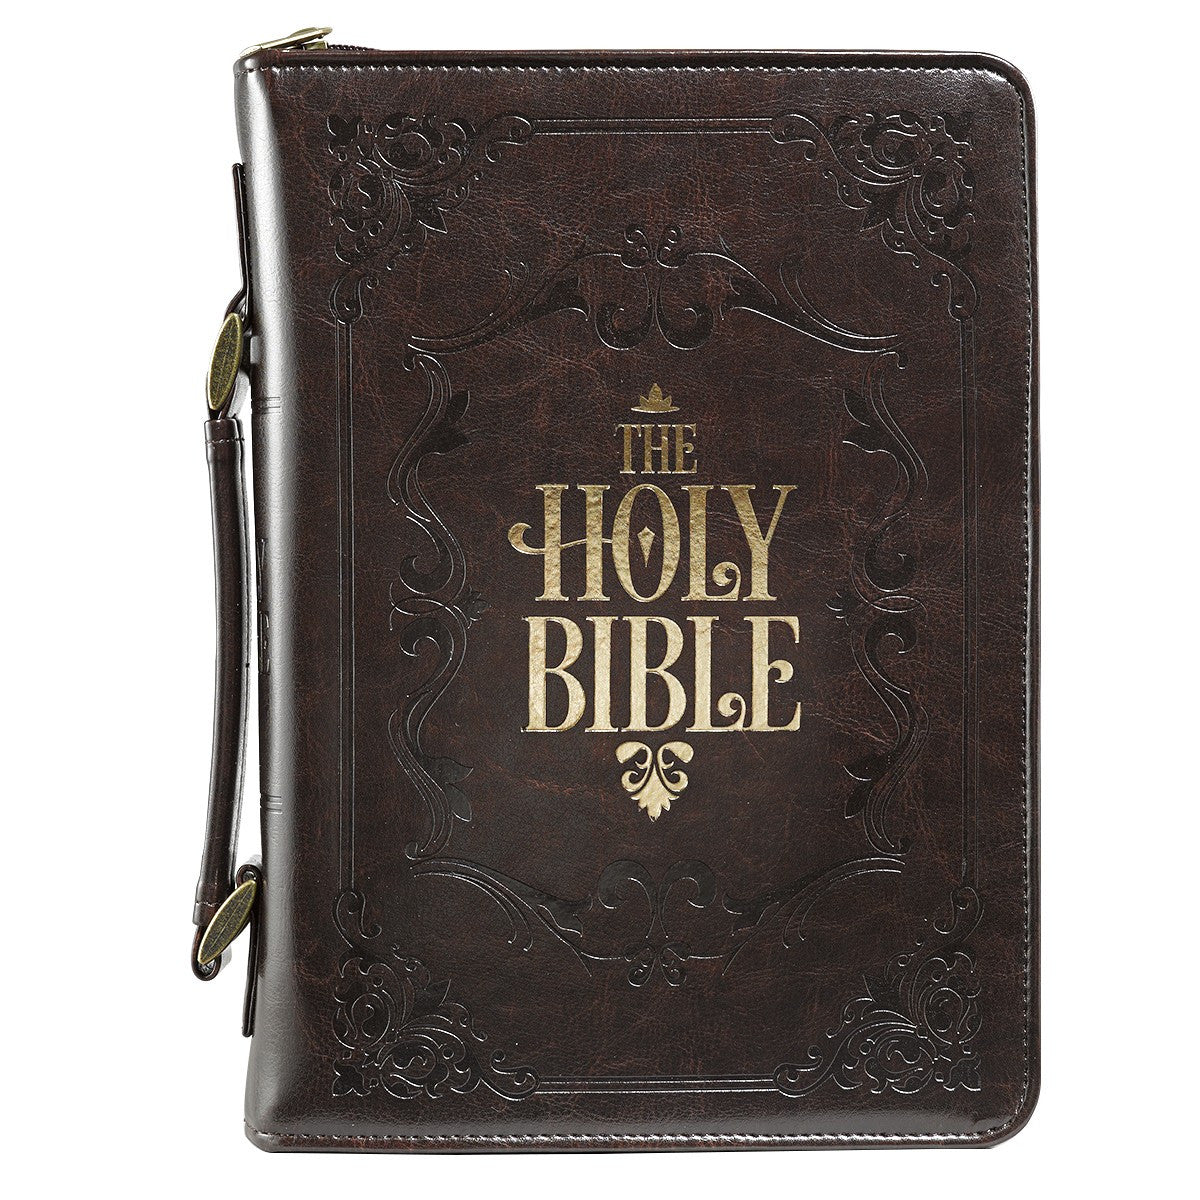 The Holy Bible Dark Brown Faux Leather Classic Bible Cover - Large